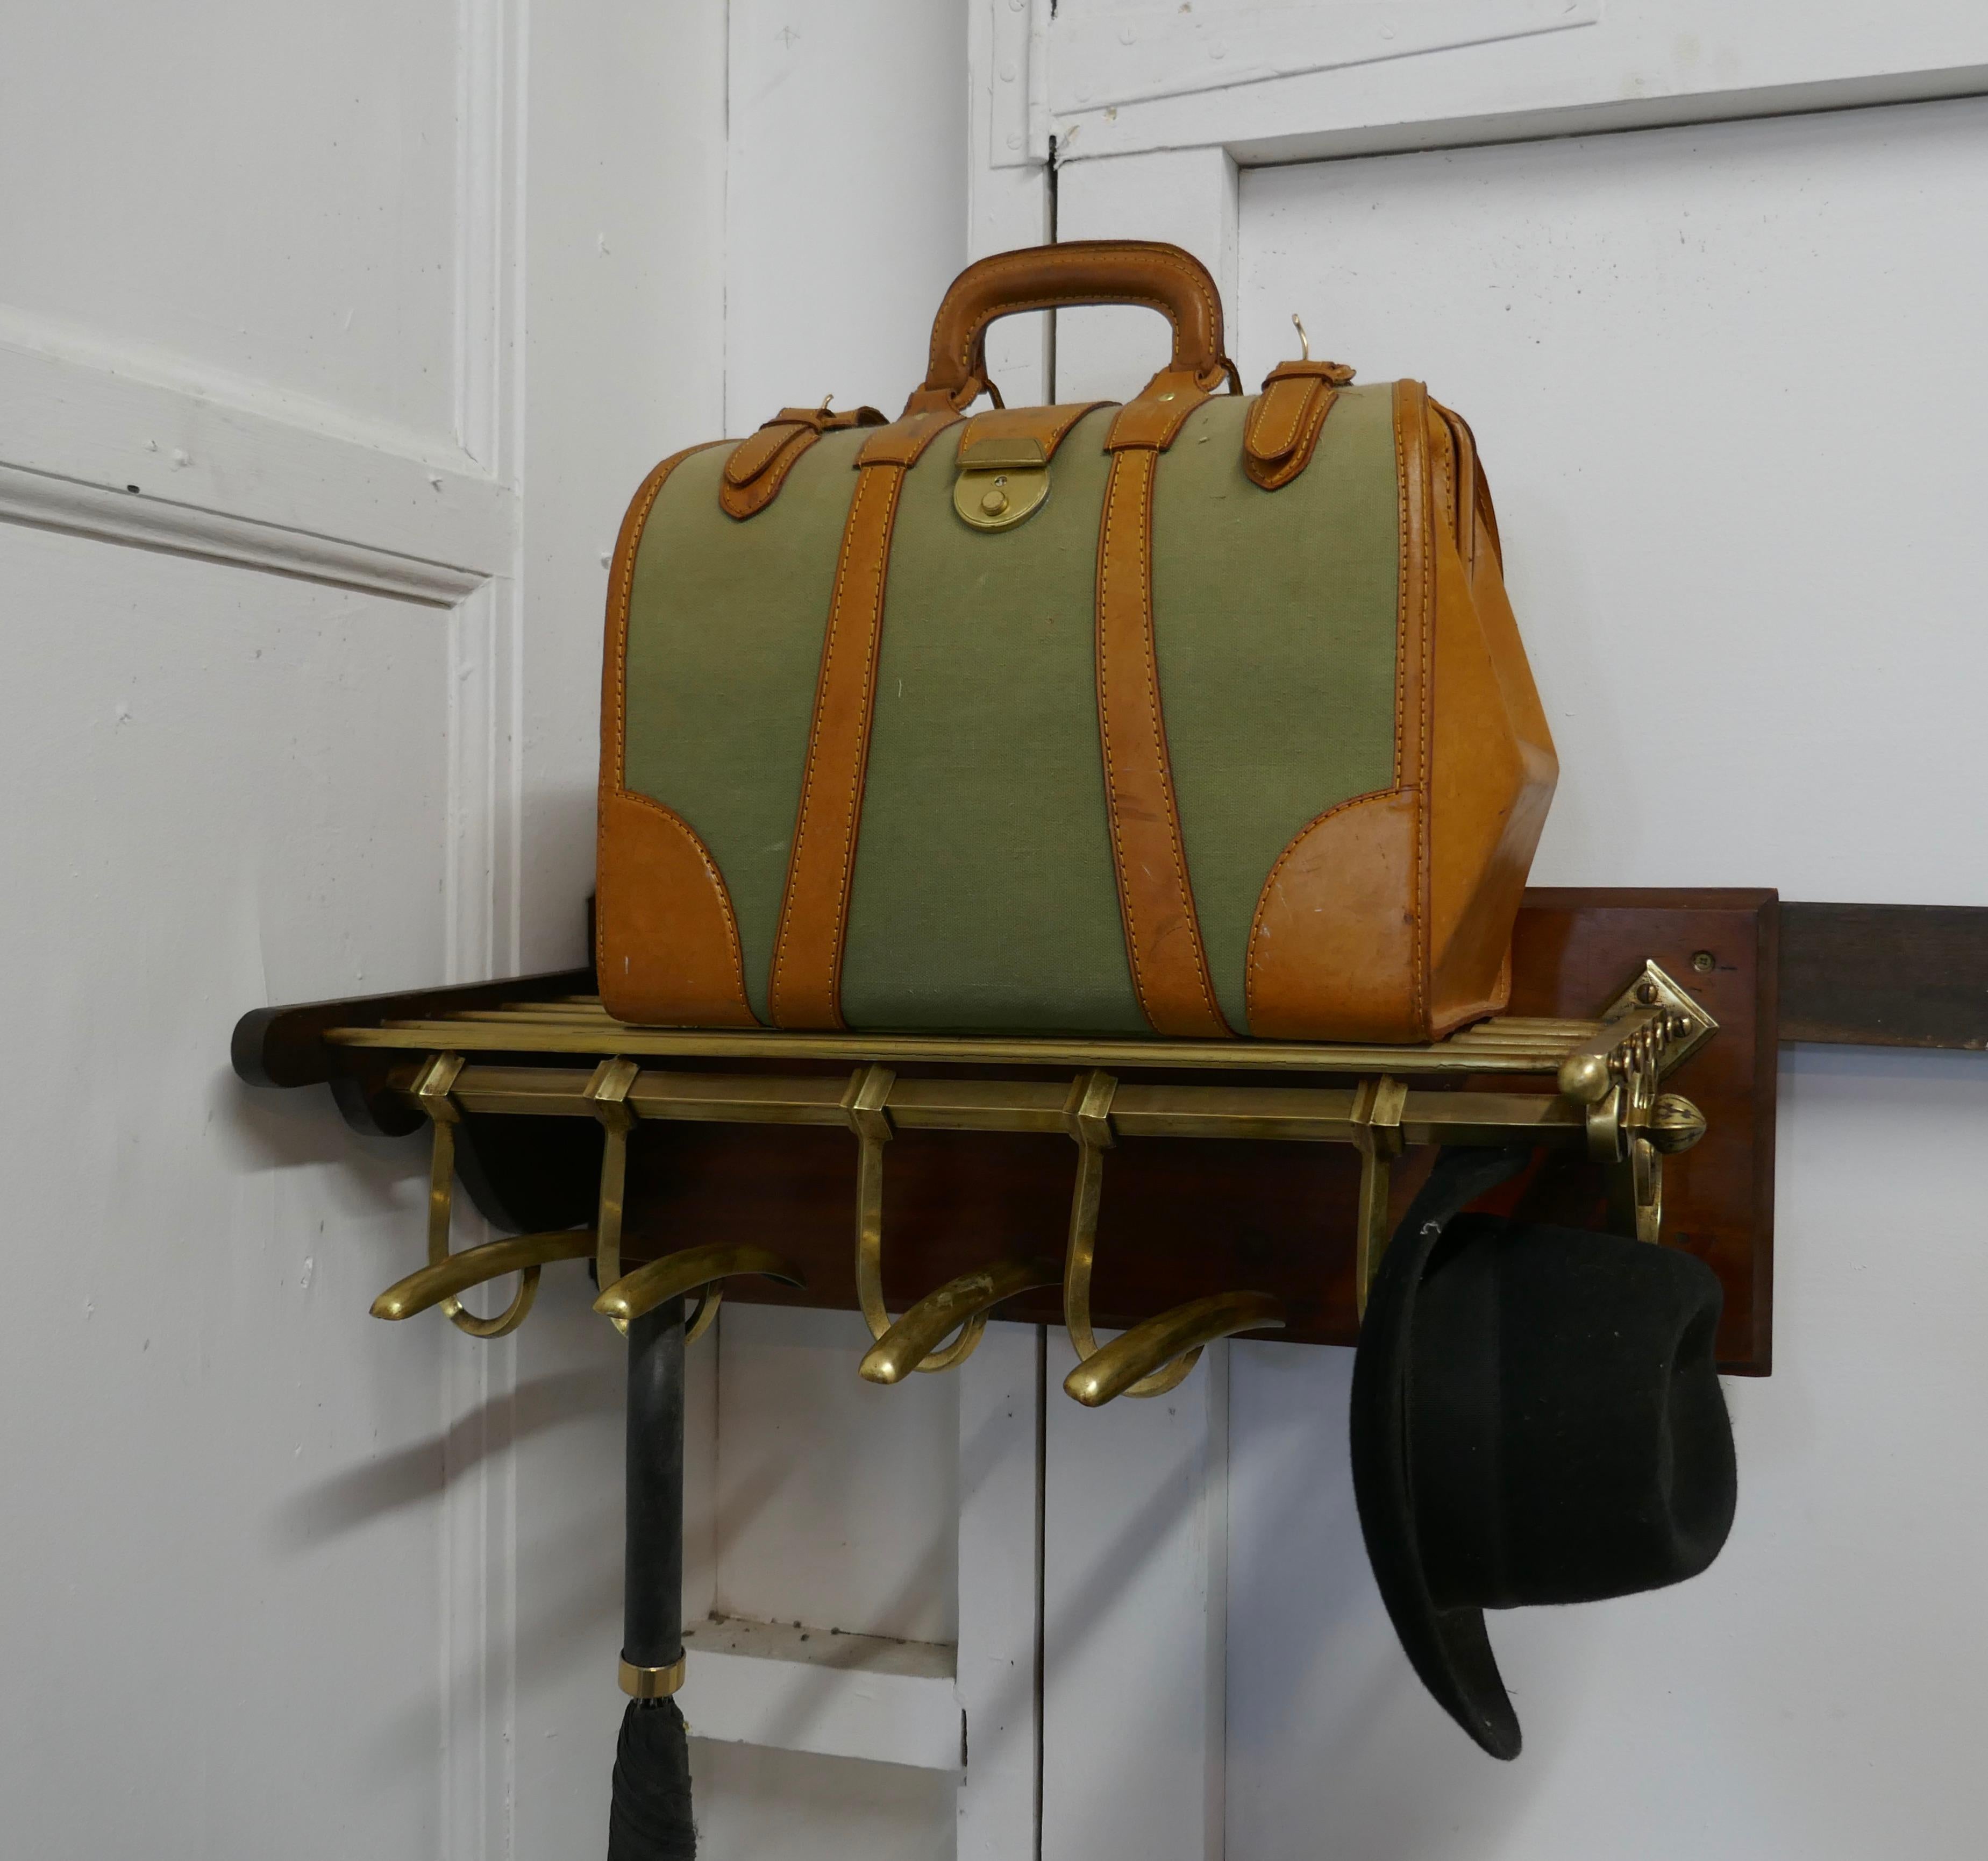 20th Century French Art Deco Brass Hat and Coat Rack, Pullman Railway Train Style